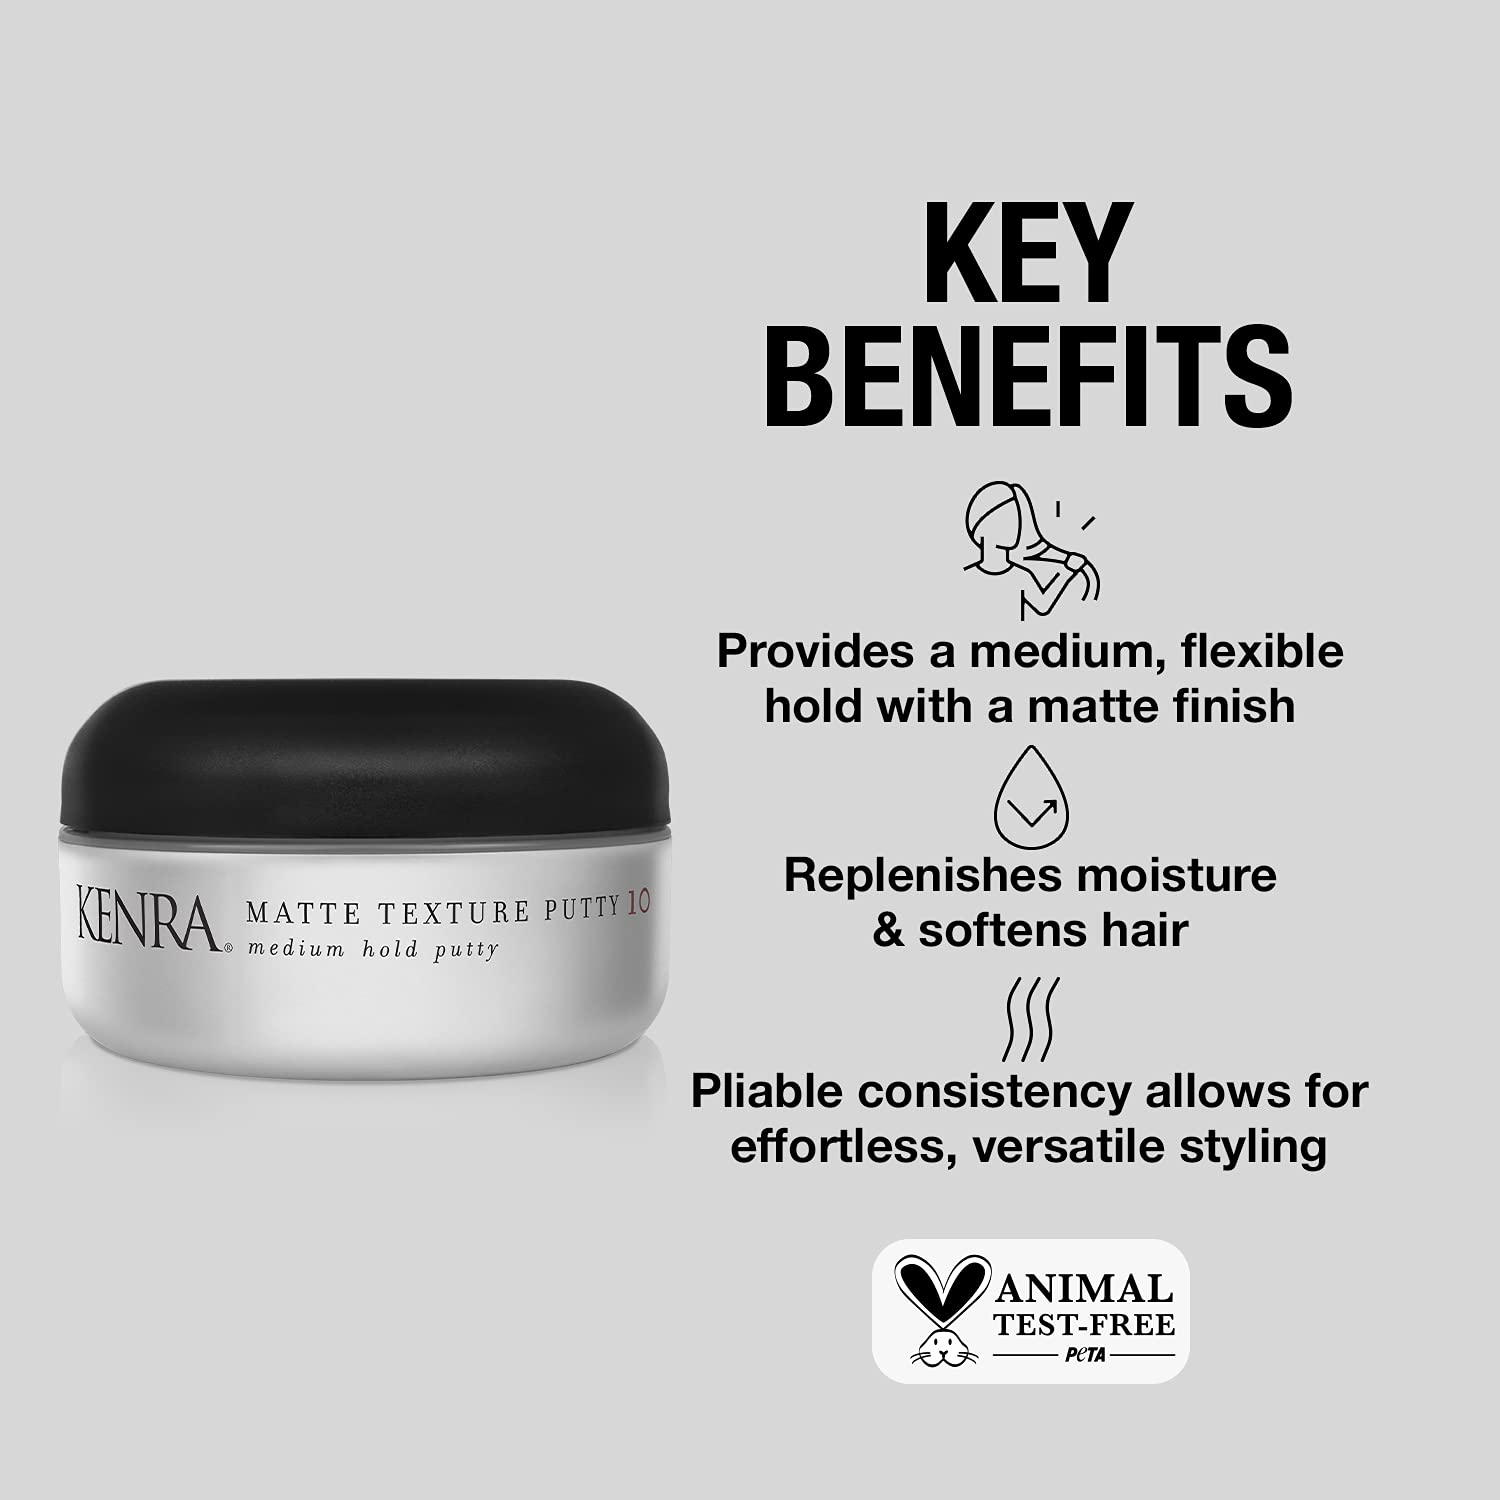 Kenra Matte Texture Putty 10 | Medium Hold Styler | Flexible Hold With A Matte Finish | Replenishes Moisutre & Softens Hair | All Hair Types